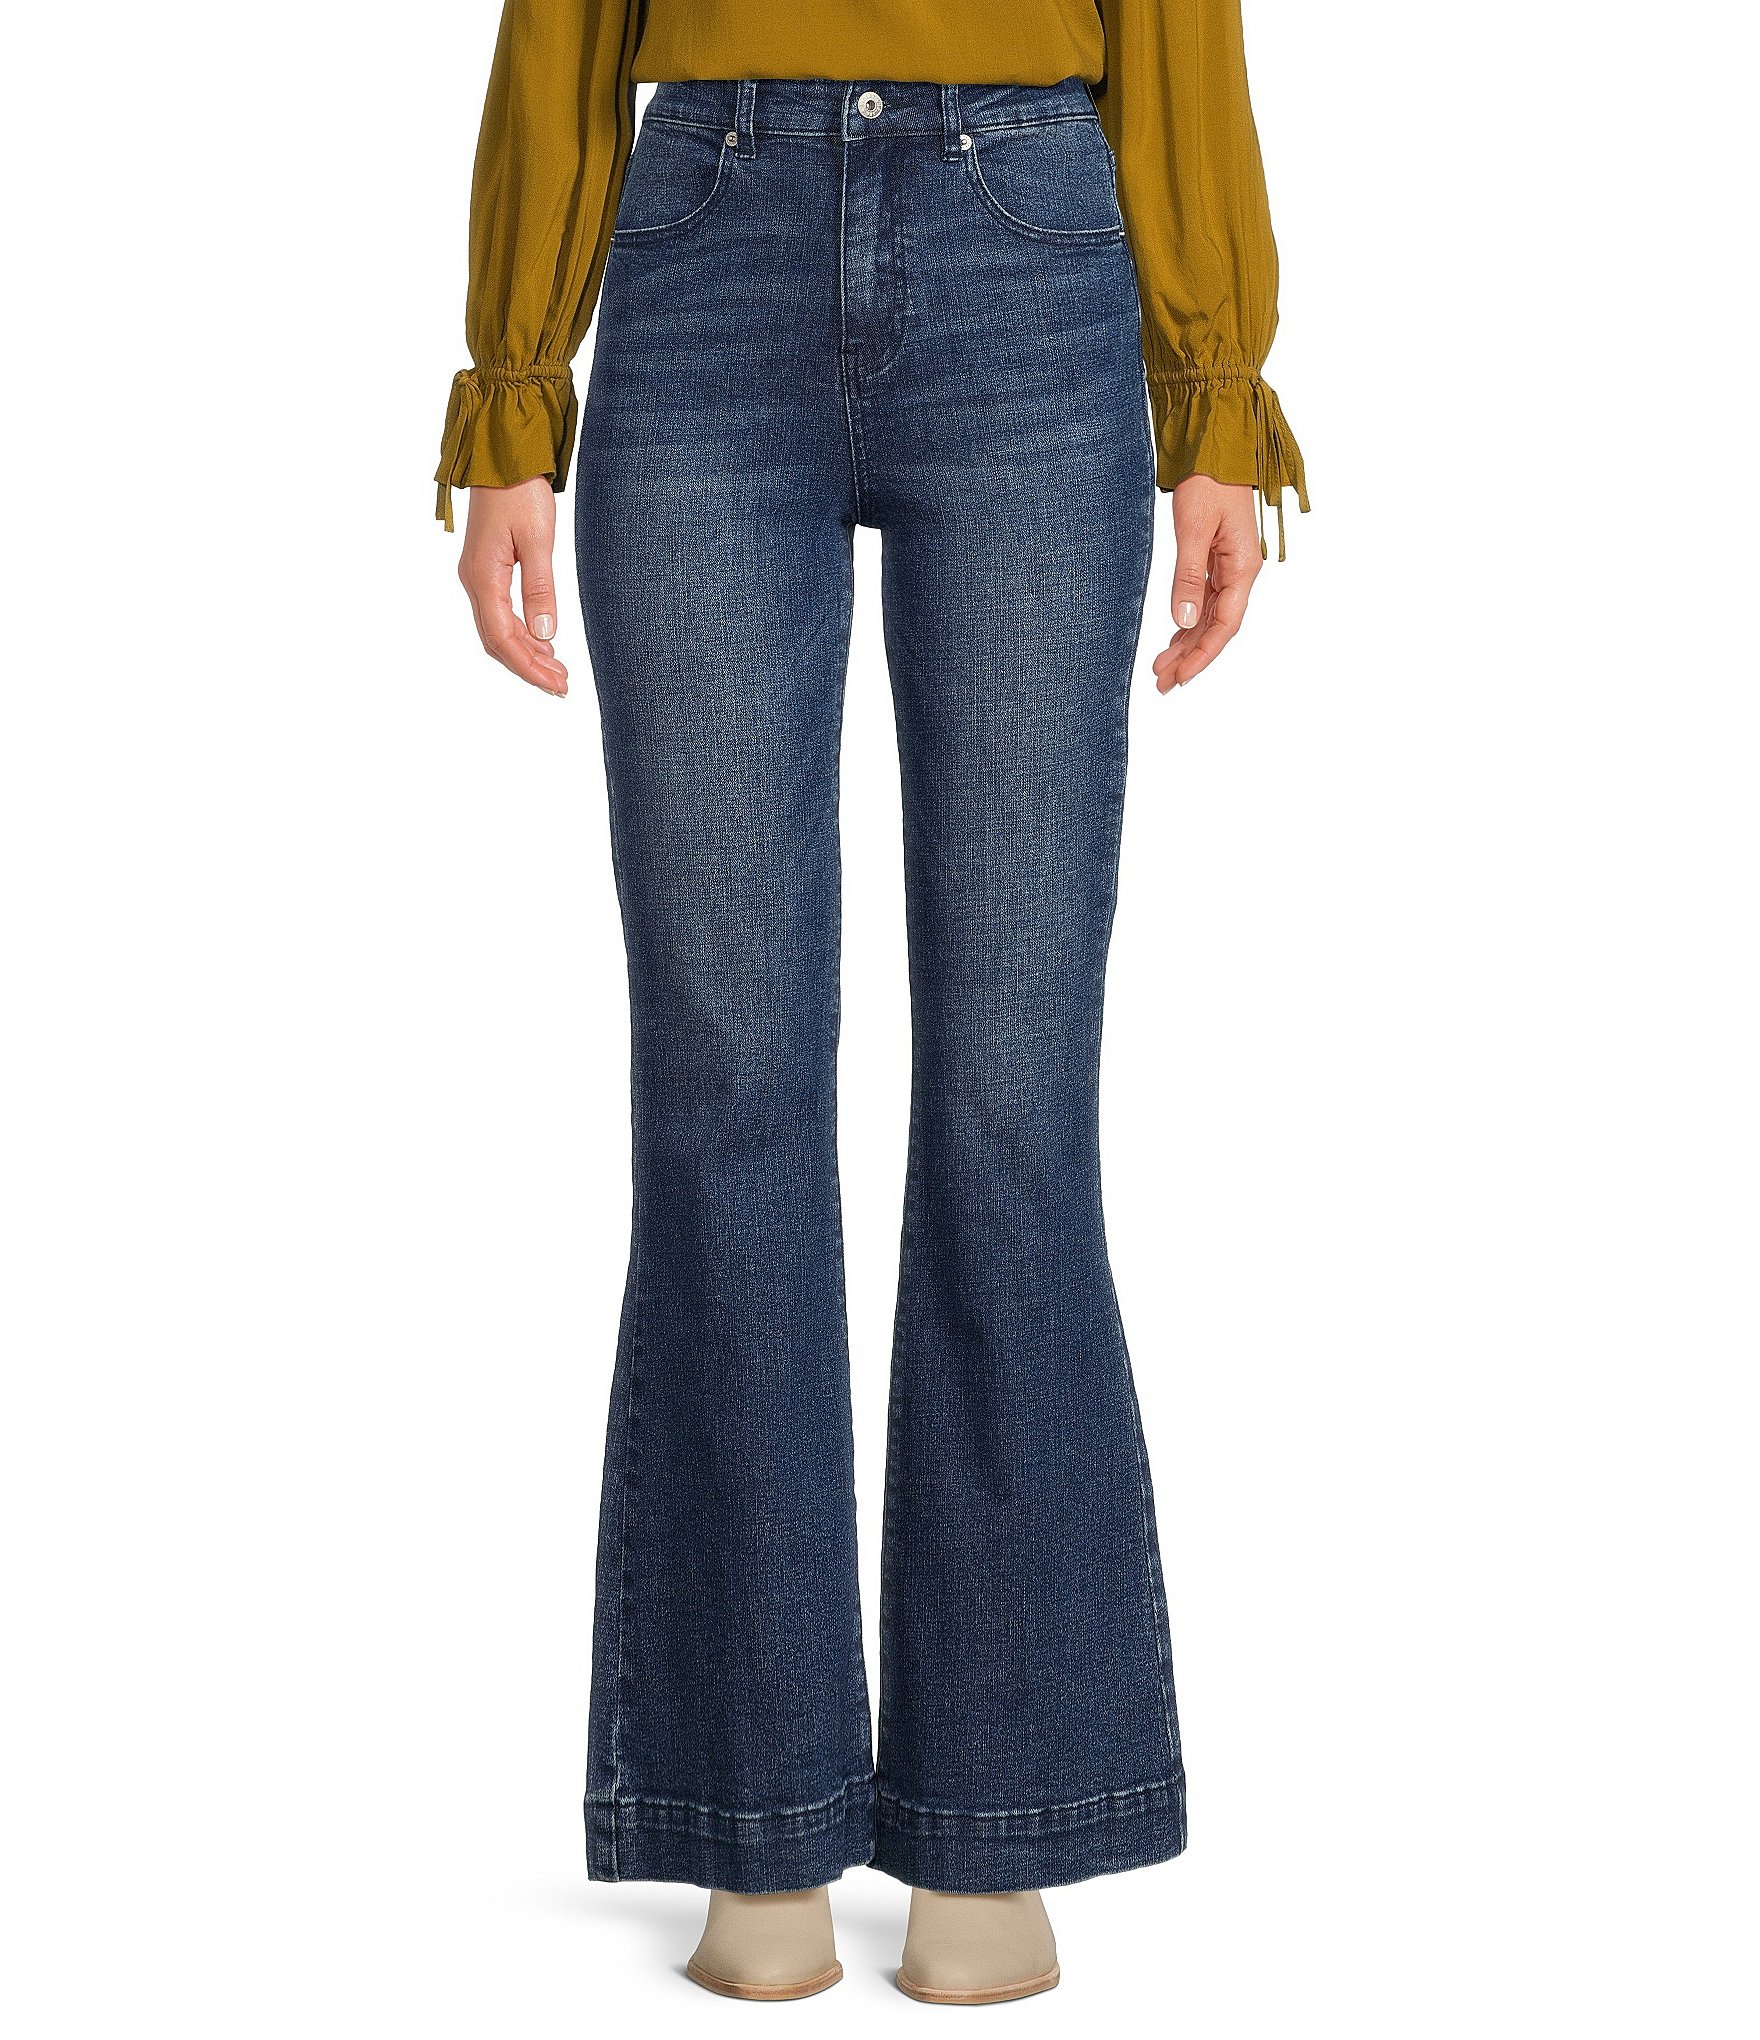 Bell Bottoms & Flare Jeans to Add to Your Kid's Closet